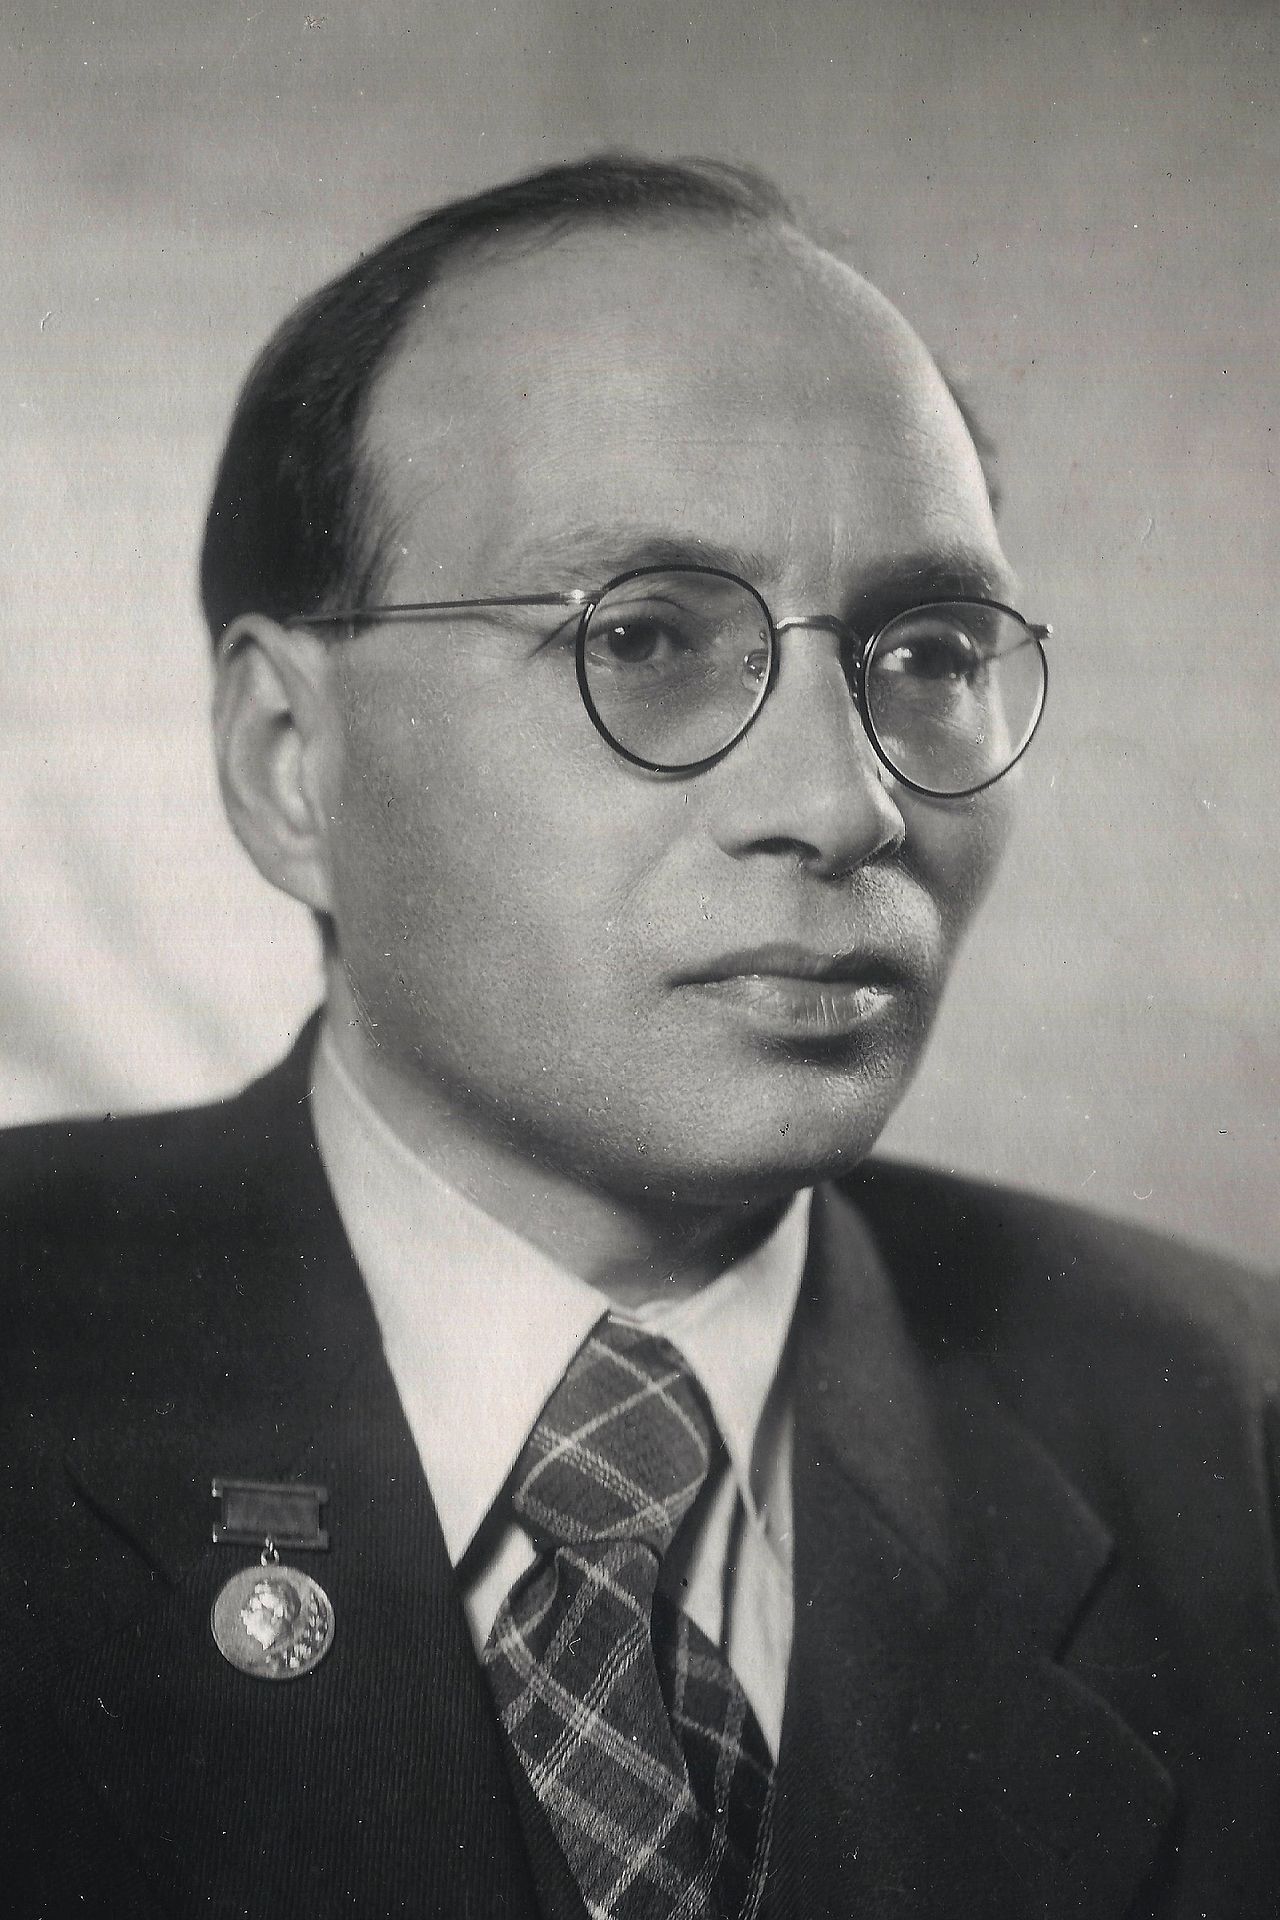 D.S. Volosov is one of the most famous and prolific Soviet opticians.